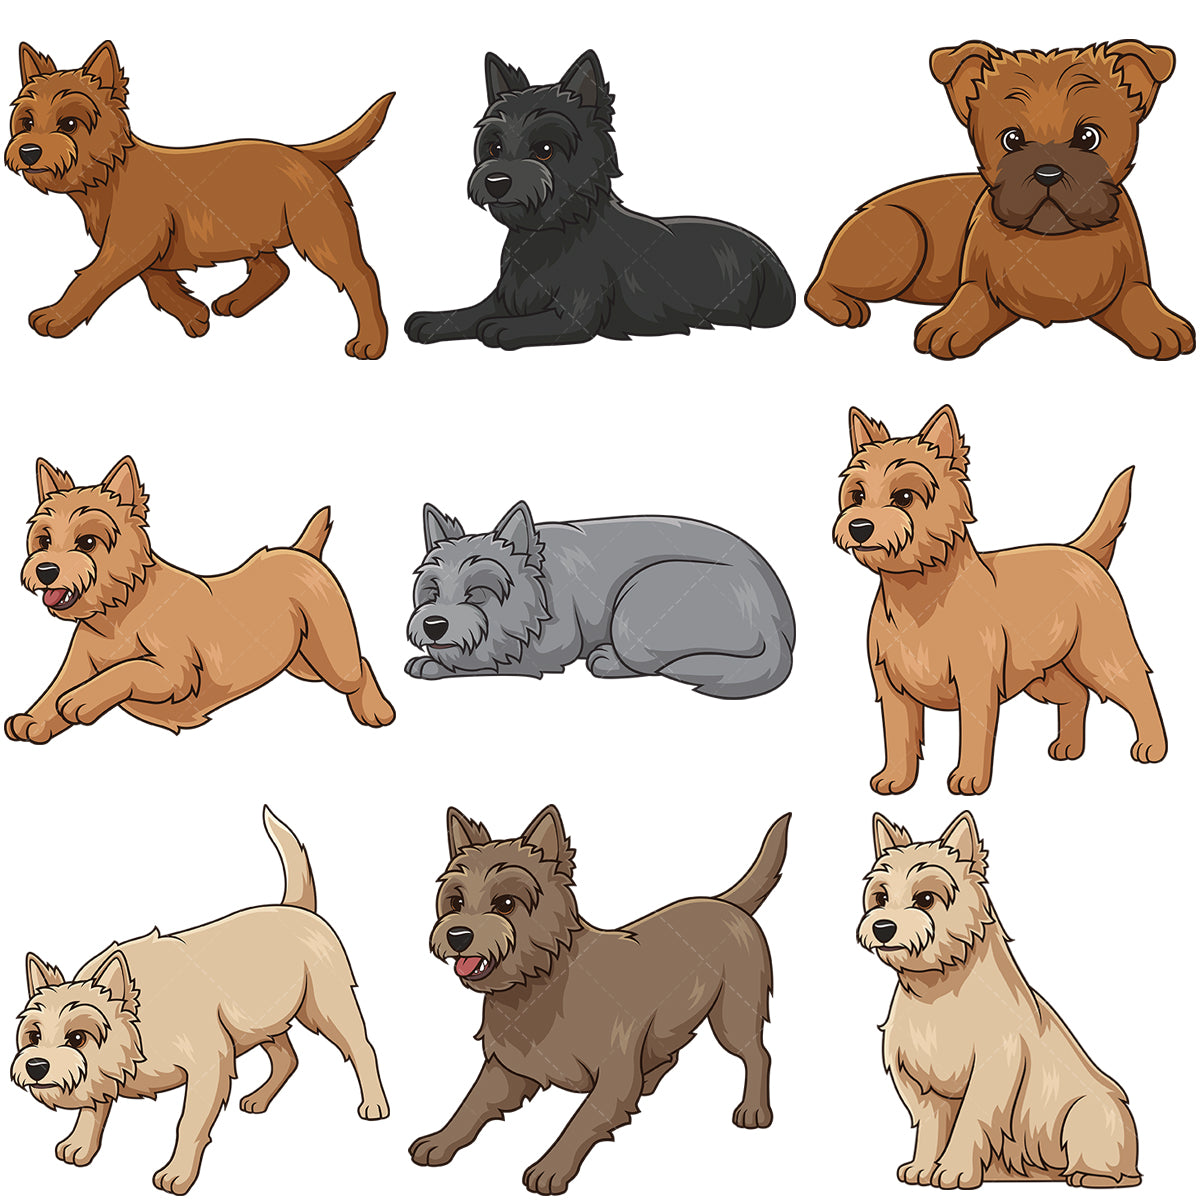 A bundle of 9 royalty-free stock vector illustrations of cairn terrier dogs.